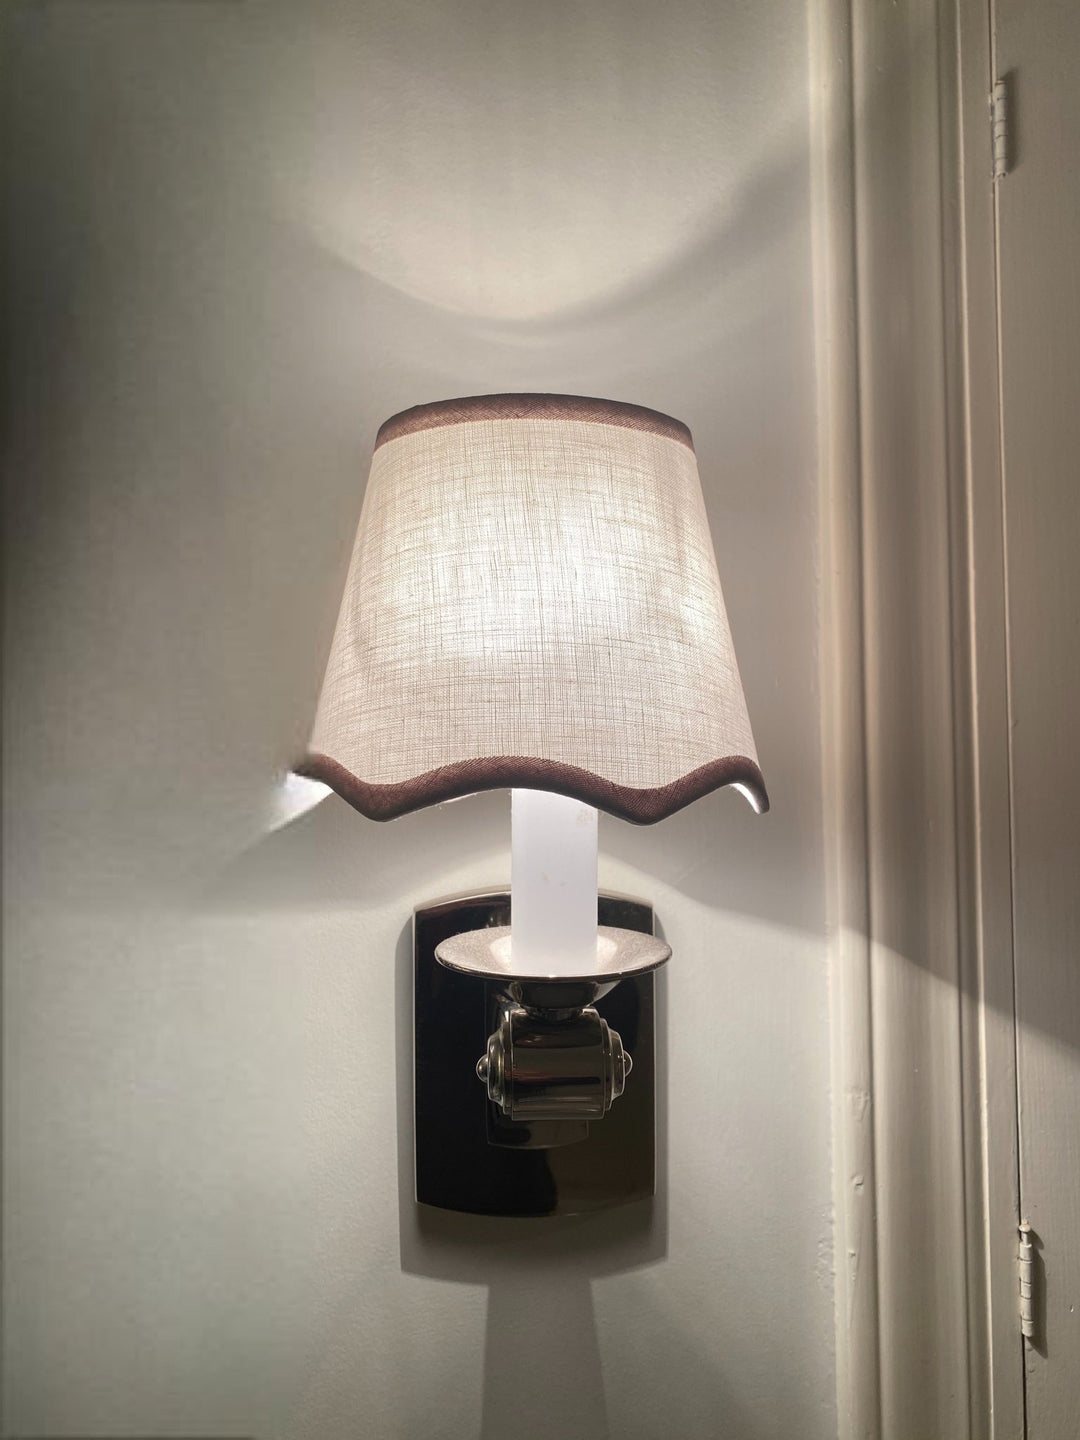 New - Scalloped Linen Snow Hardback Sconce Shade - Lux Lamp Shades